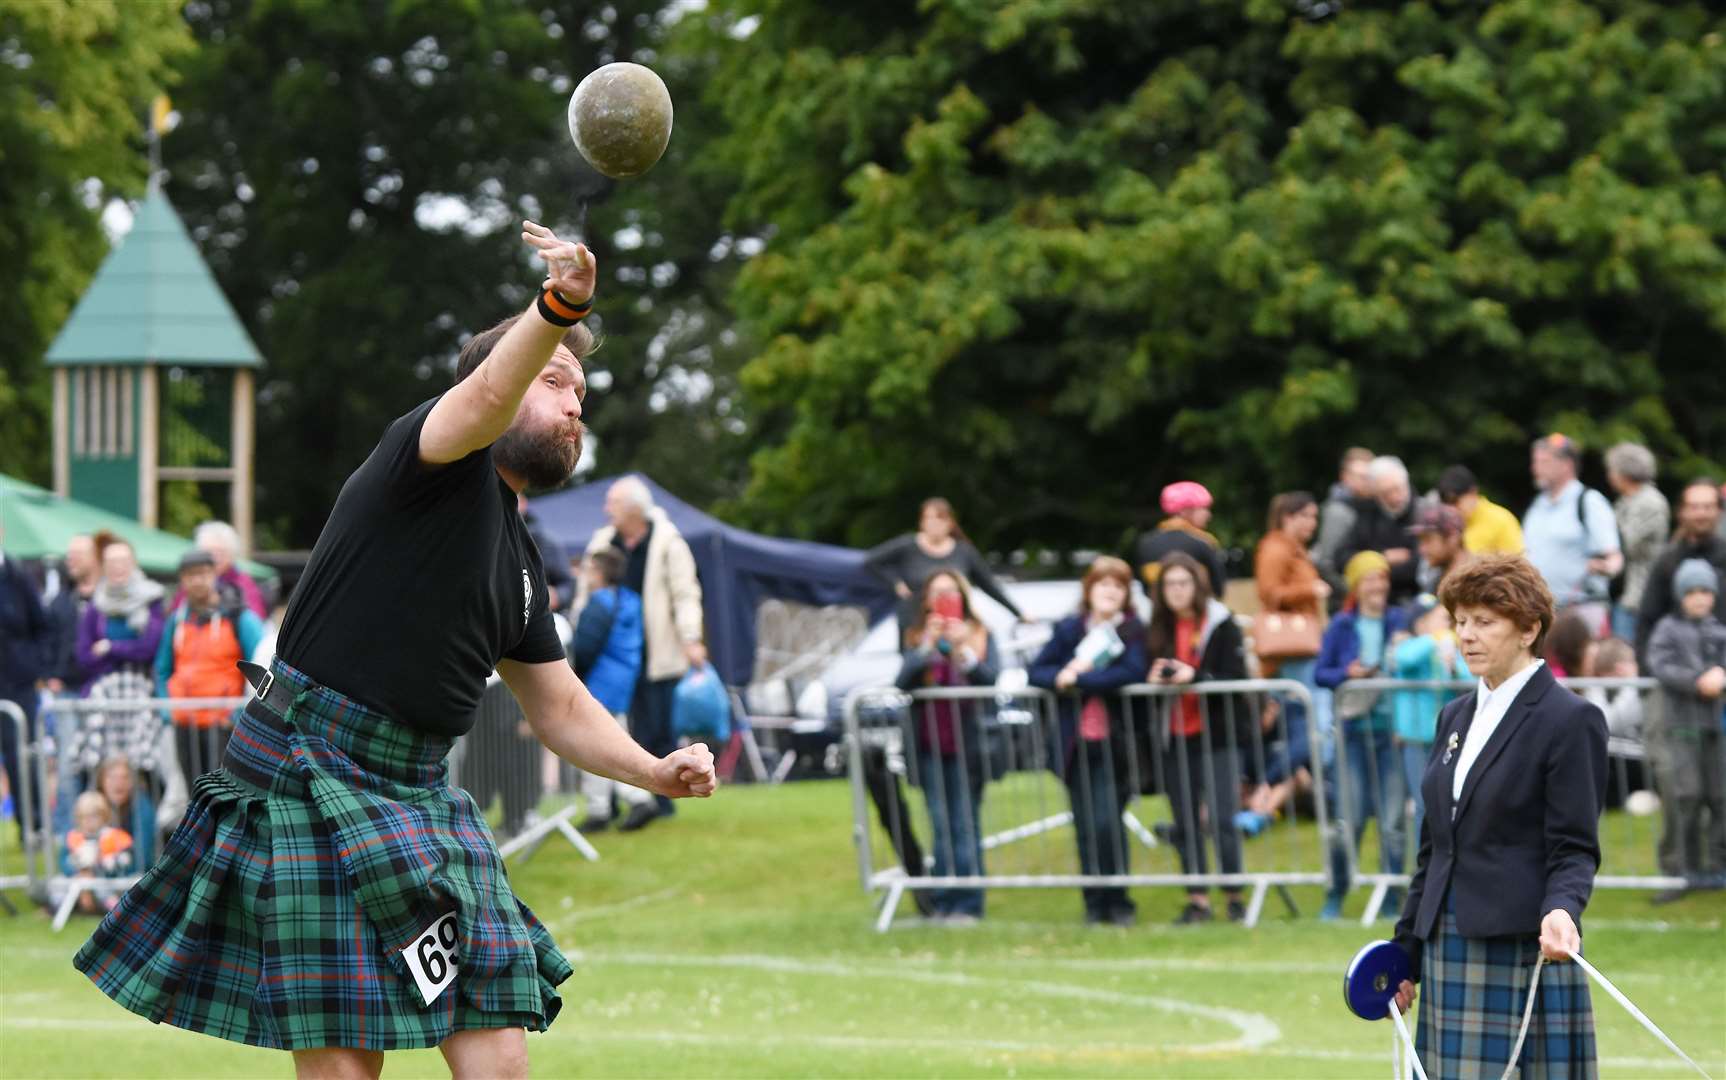 Ross Broom from Carluke competing at Forres Highland Games in 2019. Picture: Becky Saunderson. Image No.044383.